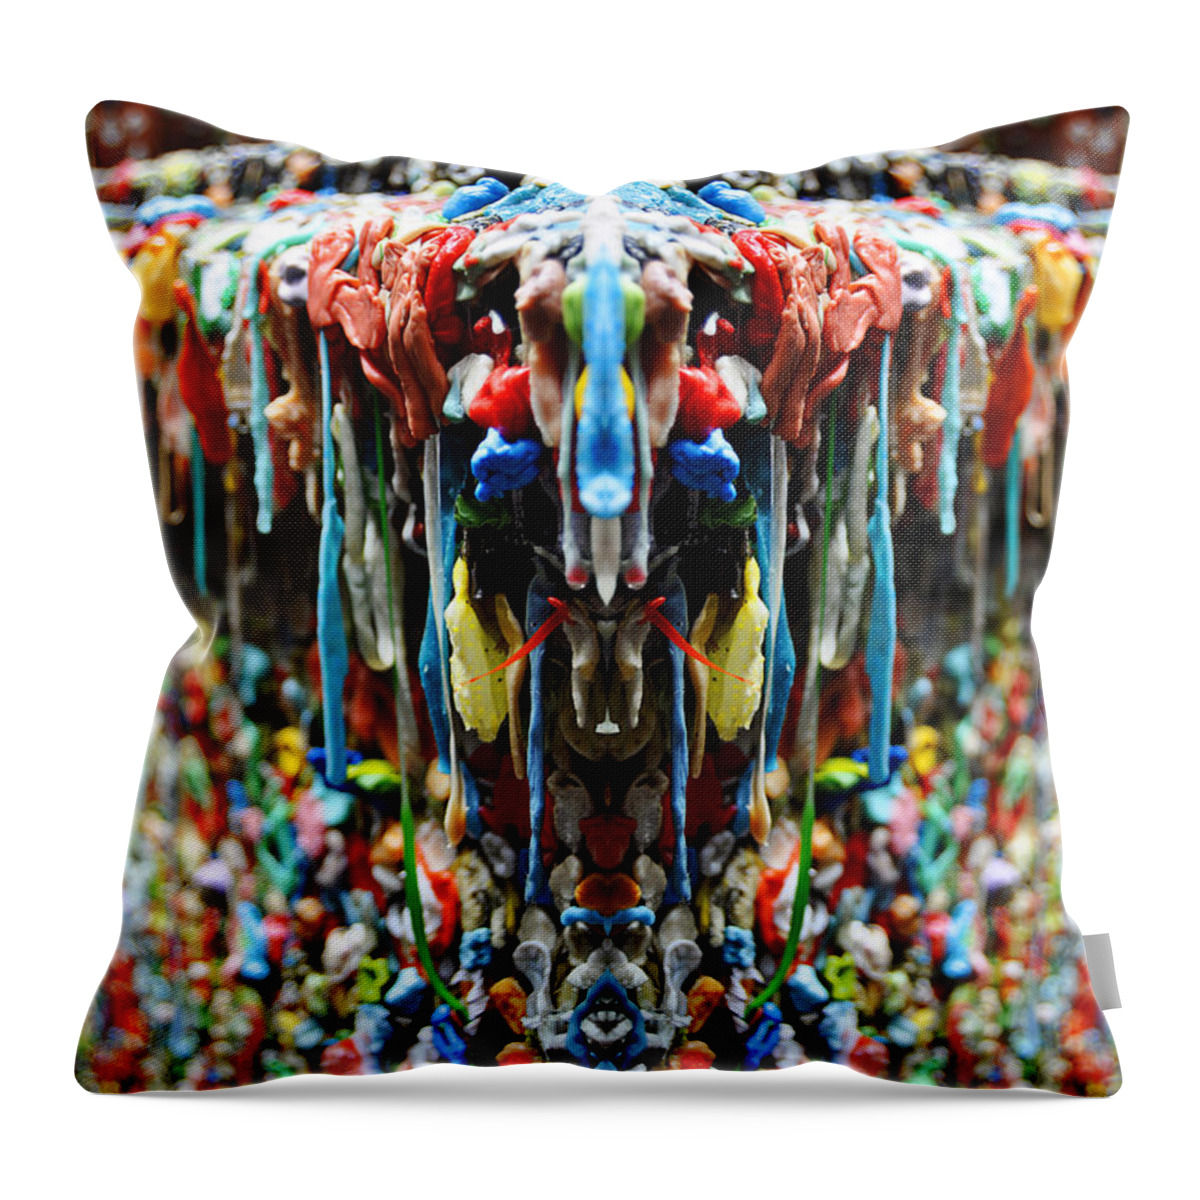 Gum Throw Pillow featuring the digital art Seattle Post Alley Gum Wall Reflection by Pelo Blanco Photo